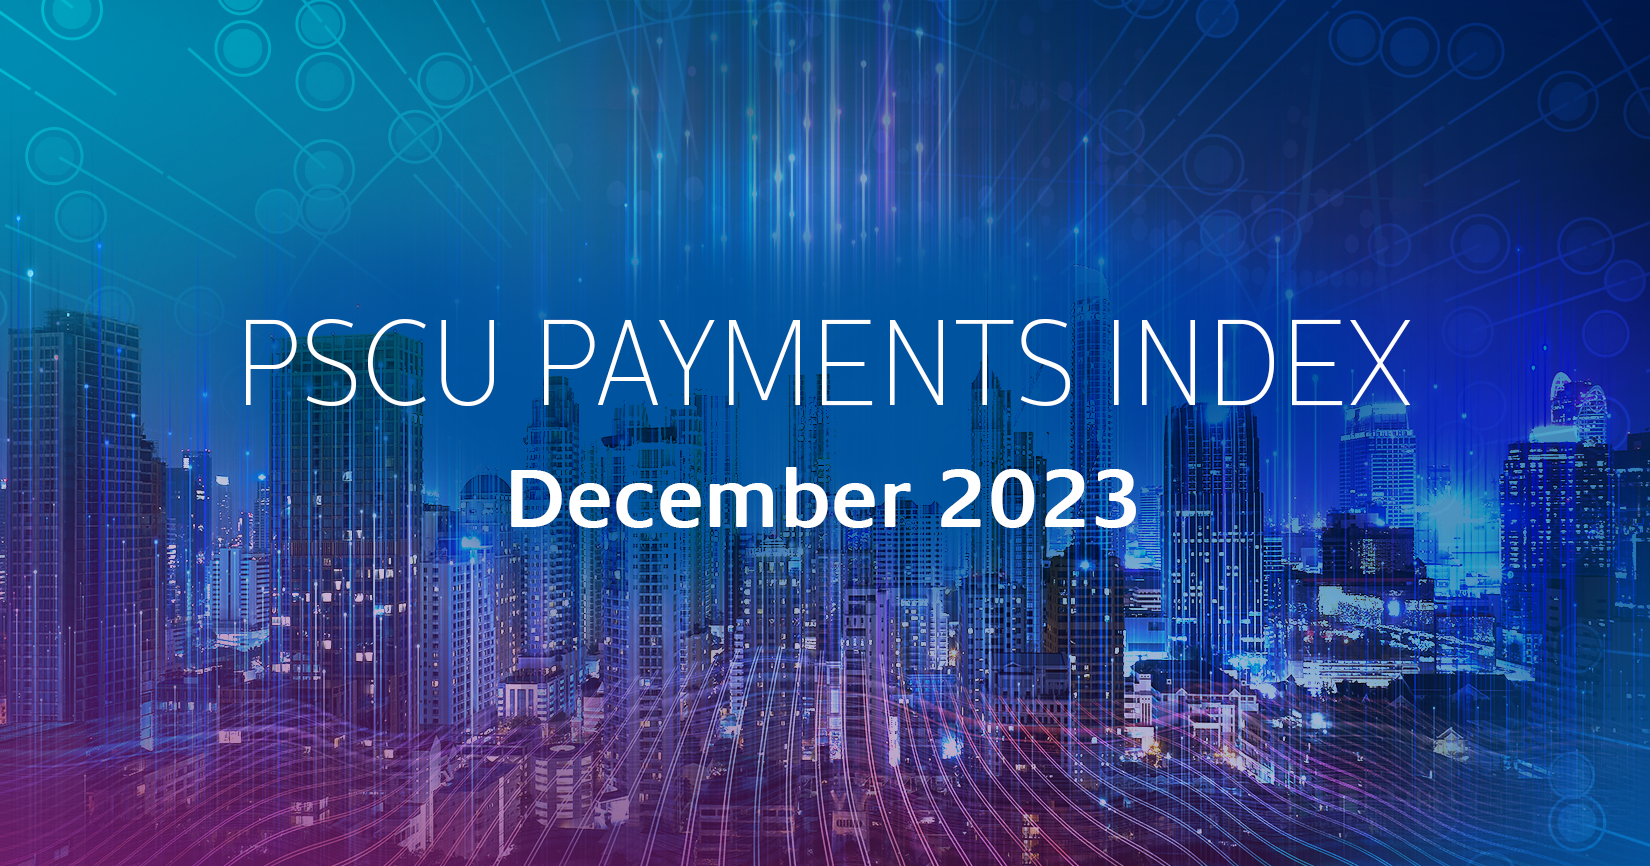 "PSCU Payments Index December 2023: A Deep Dive into Holiday Spending – Part 2 post thumbnail"